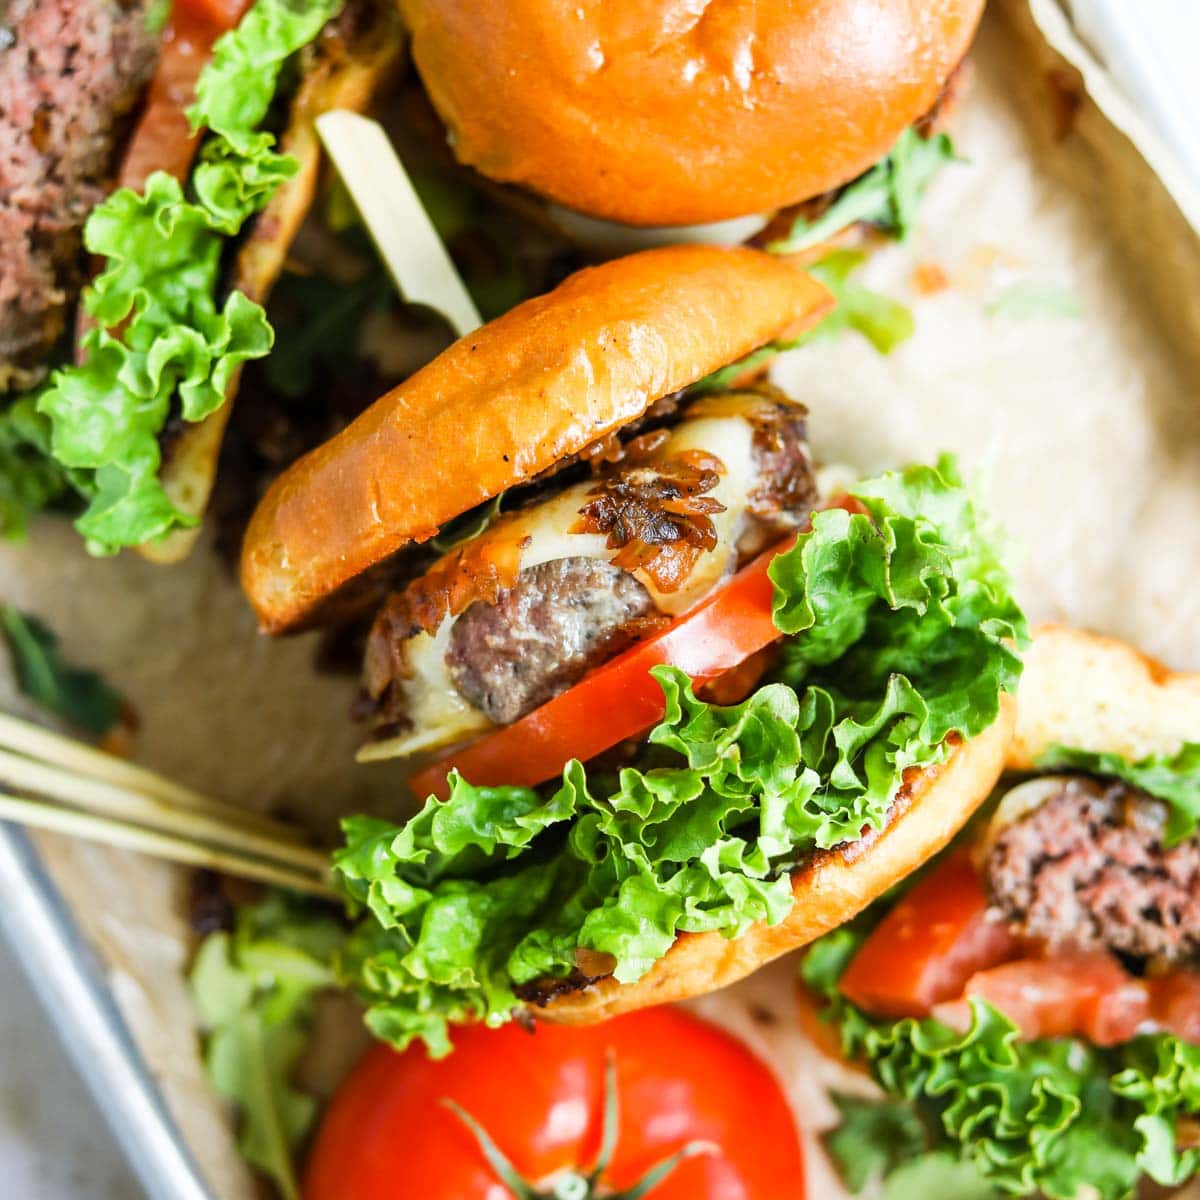 https://theheirloompantry.co/wp-content/uploads/2022/06/cast-iron-skillet-burger-the-heirloom-pantry-1.jpg